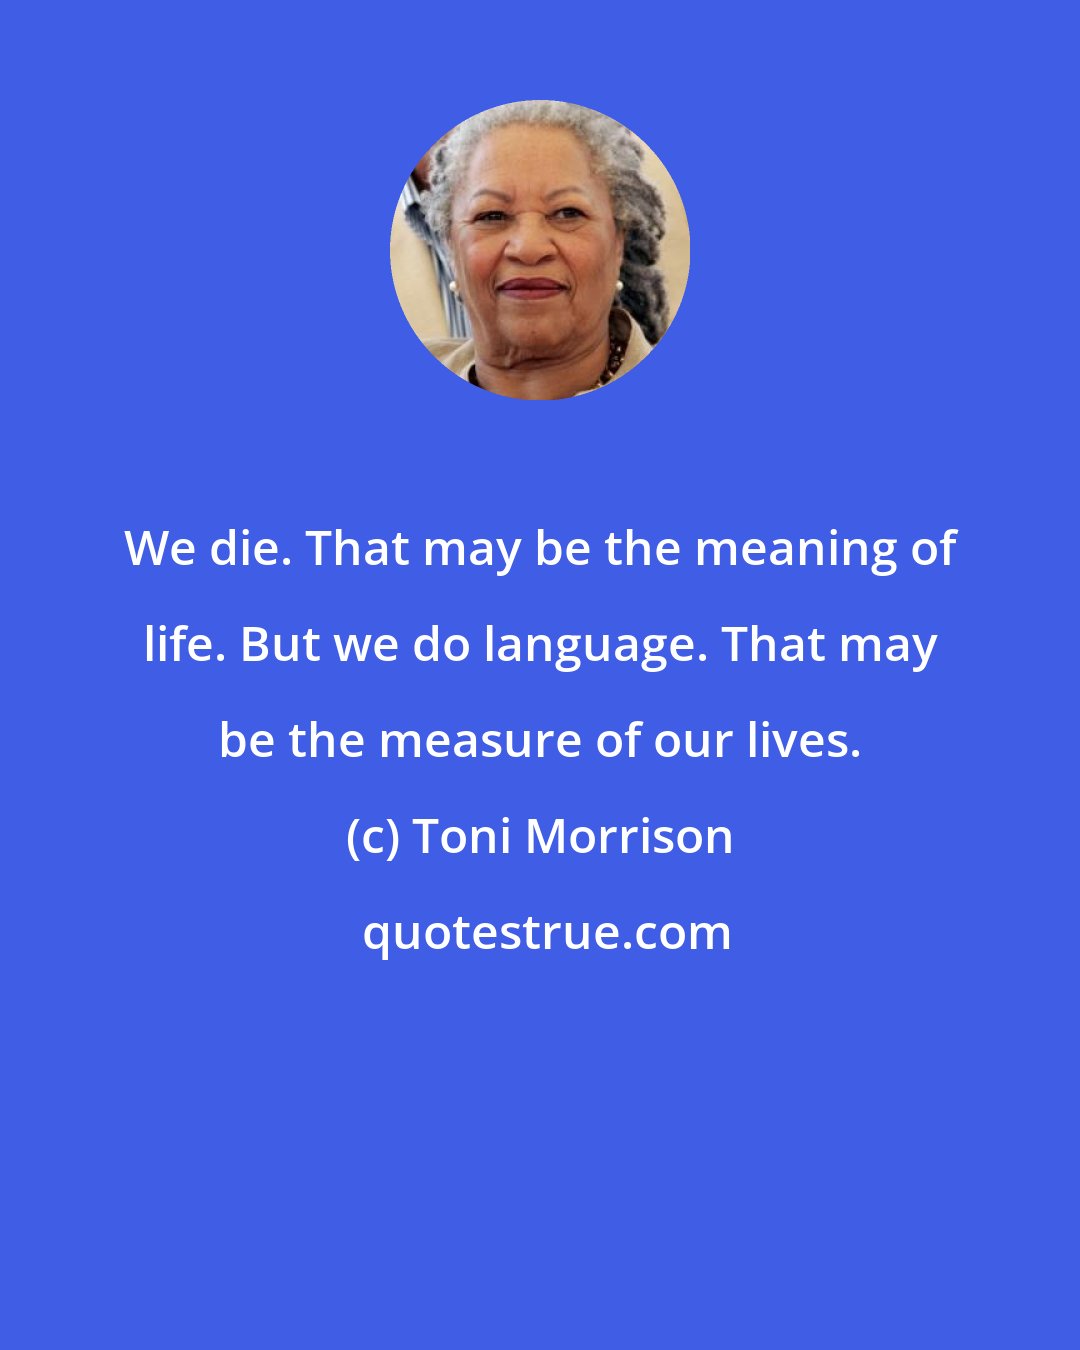 Toni Morrison: We die. That may be the meaning of life. But we do language. That may be the measure of our lives.